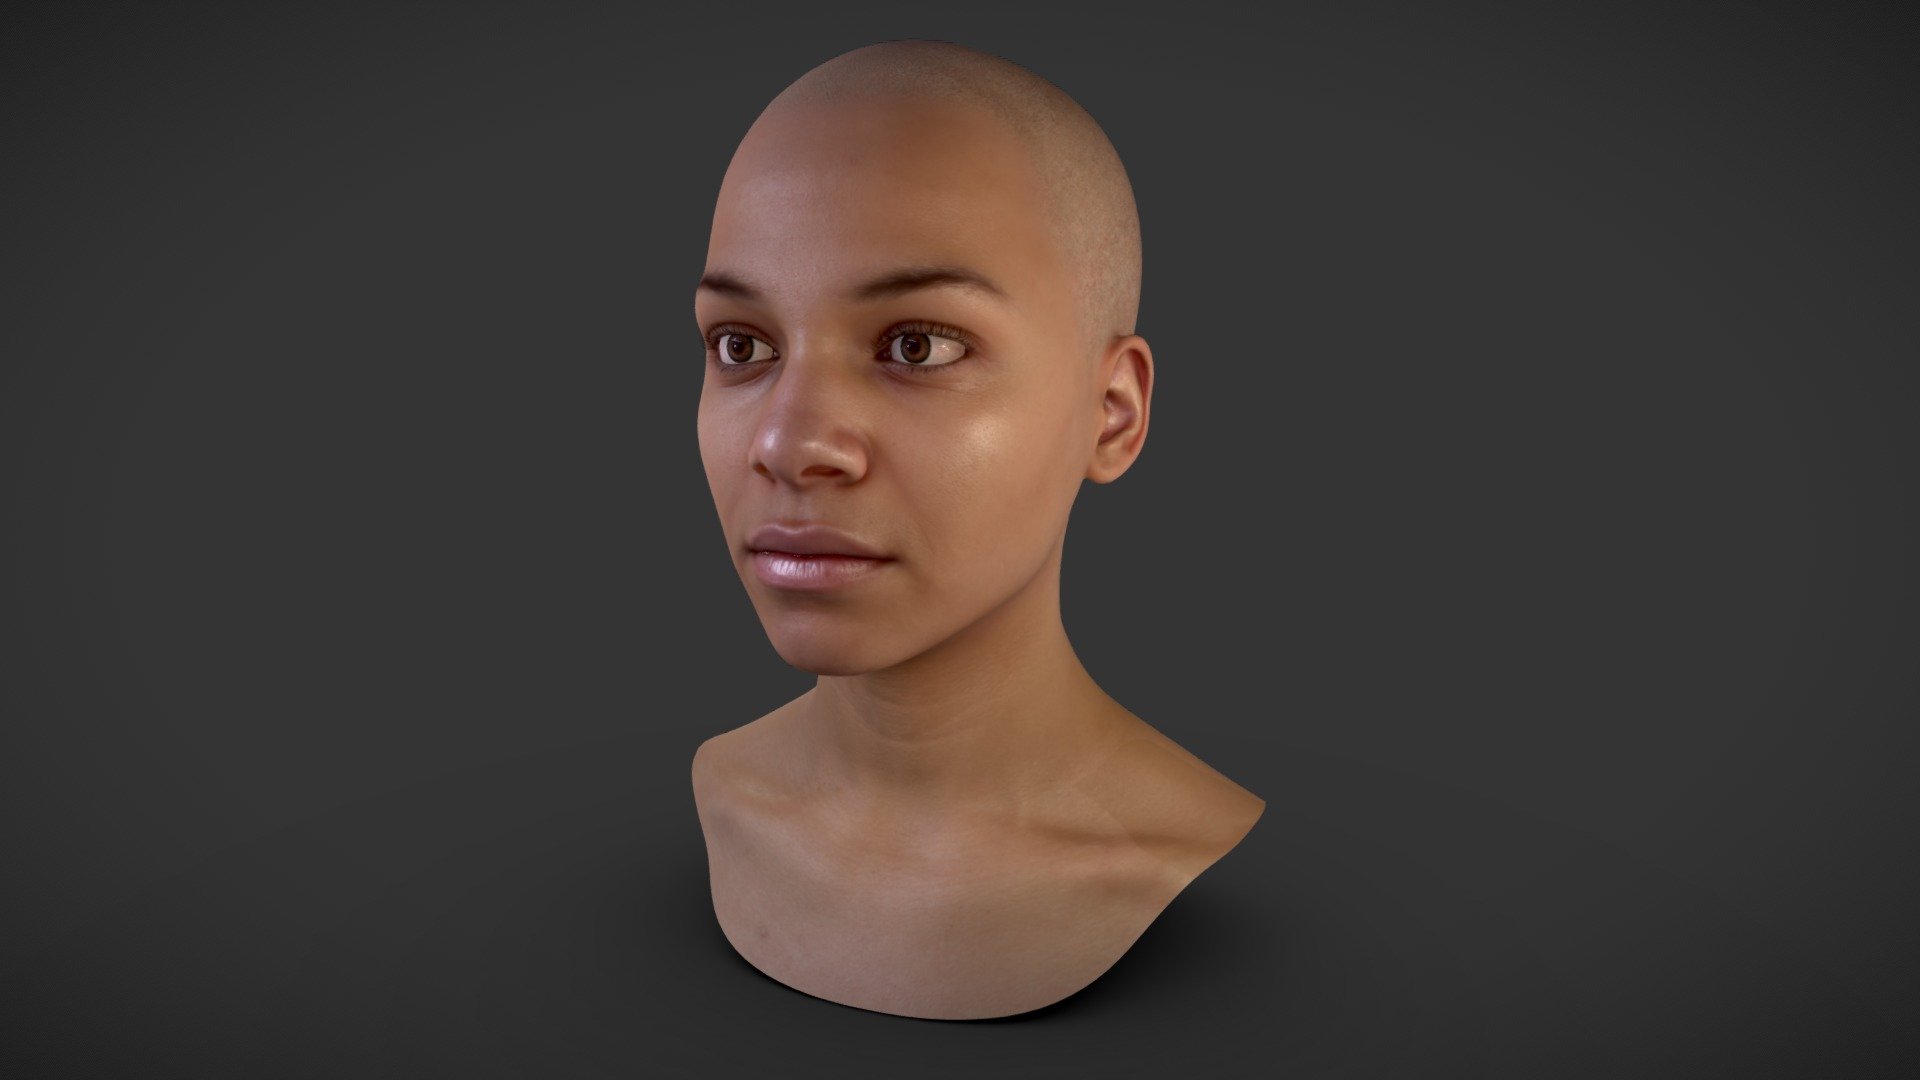 Female Head Scan_01

Cleaned, game ready and animation friendly model of a female head 3d model